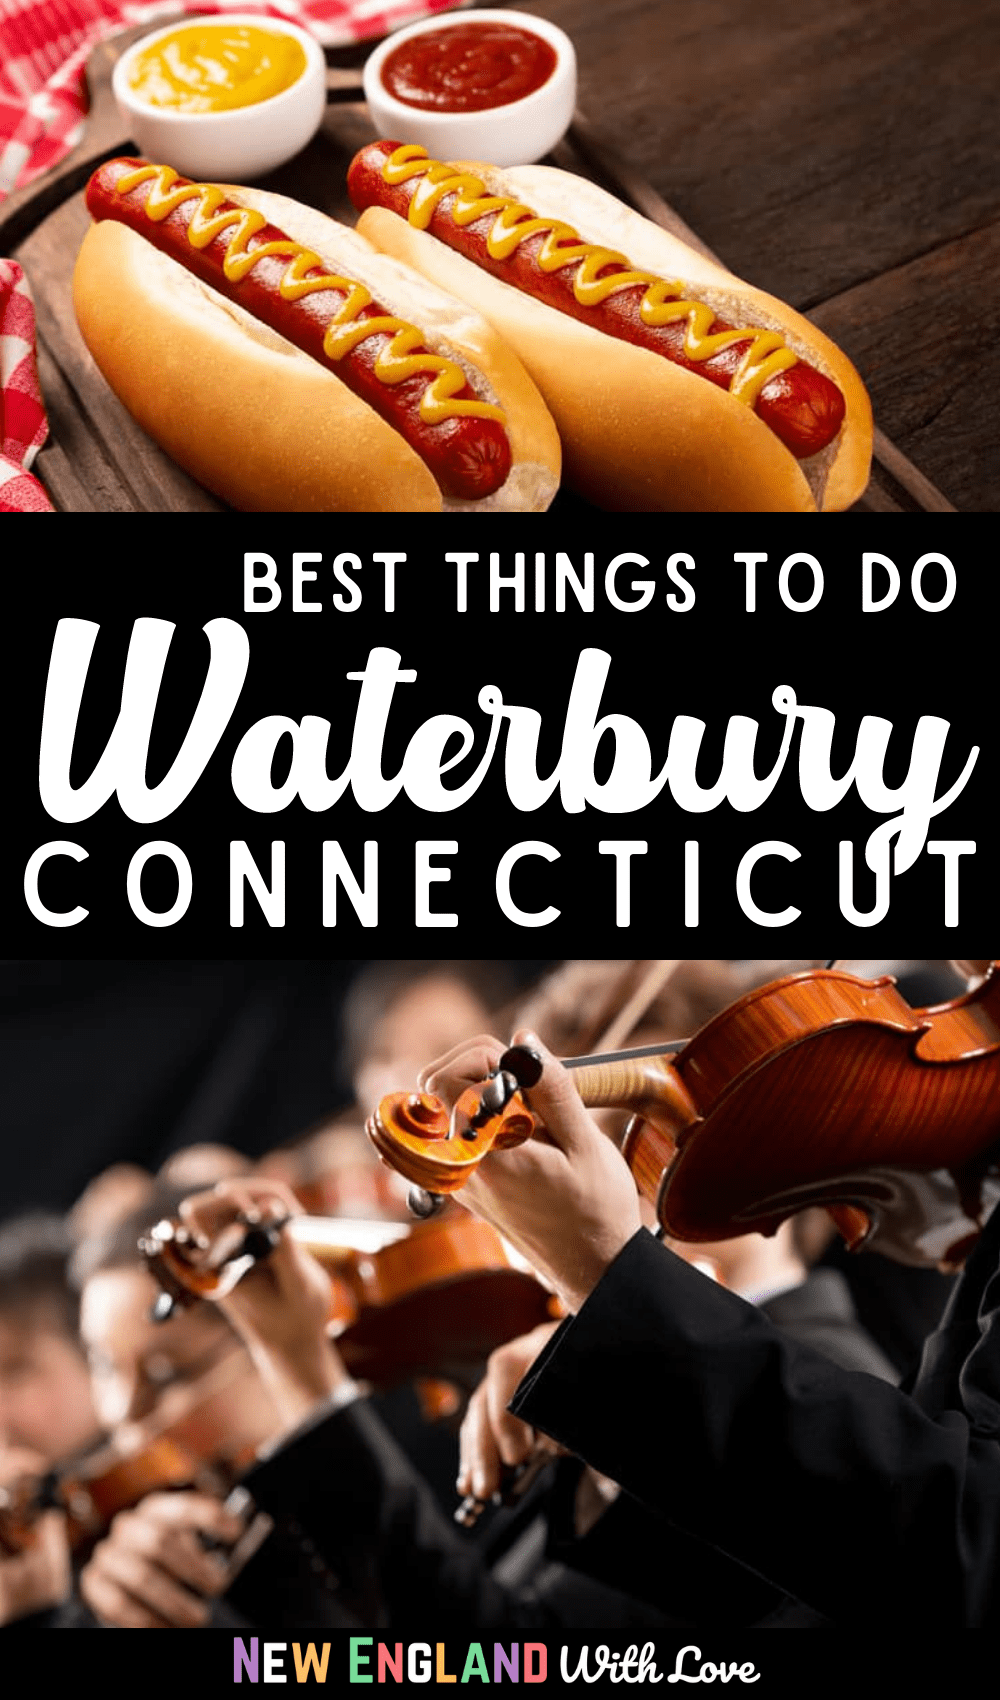 Pinterest graphic reading "Best Things To Do Waterbury Connecticut" with a picture of hot dogs on top and an orchestra on the bottom